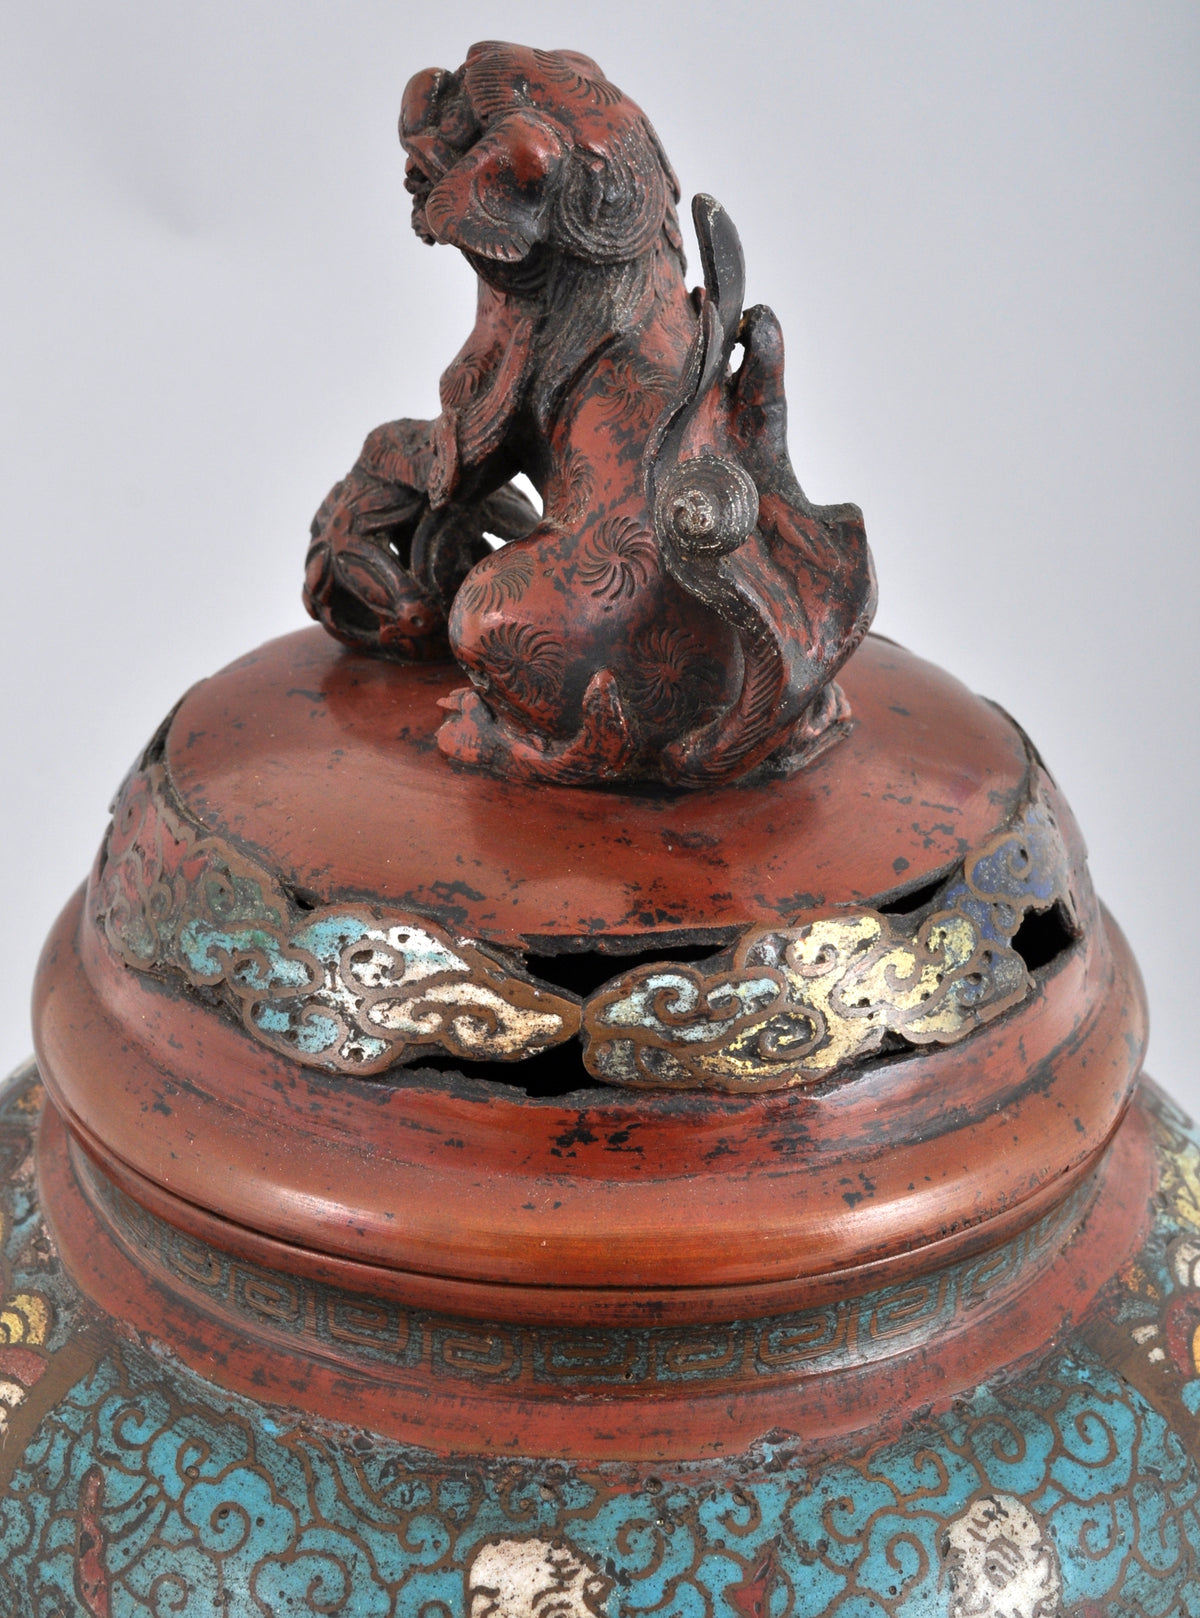 Antique Chinese Qing Dynasty Archaic Style Bronze Enamel Champlevé Censer / Incense Burner, Circa 1880